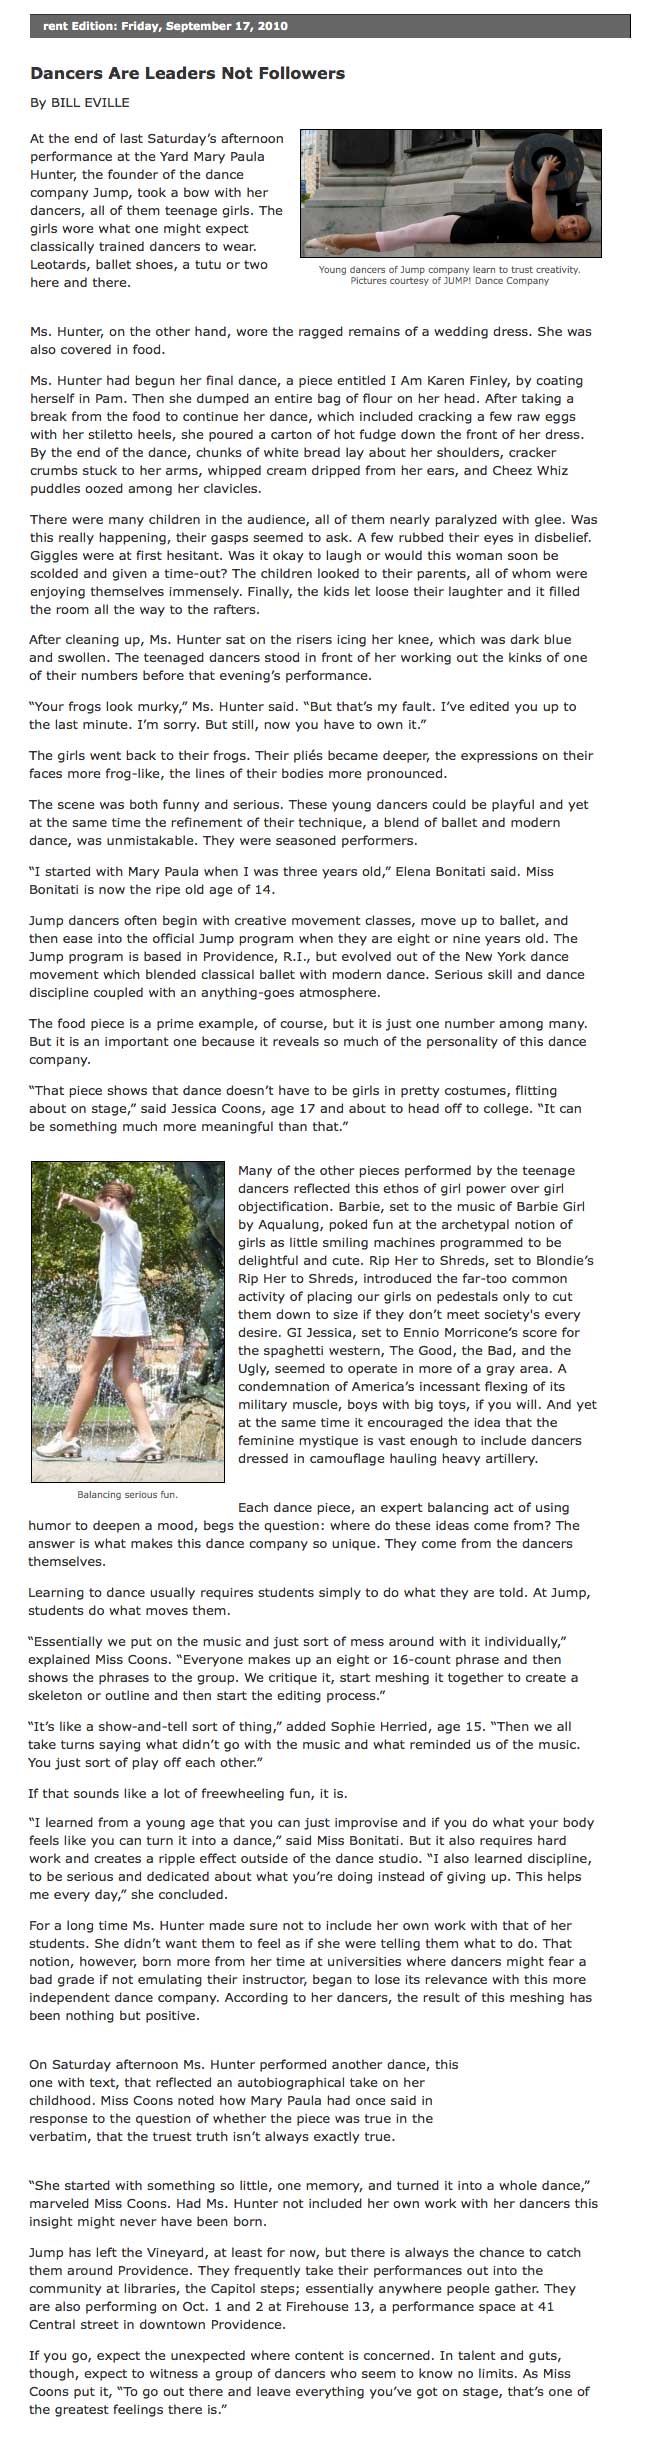 Dancers Are Leaders Not Followers Article
By BILL EVILLE, in the Vineyard Gazzette Online